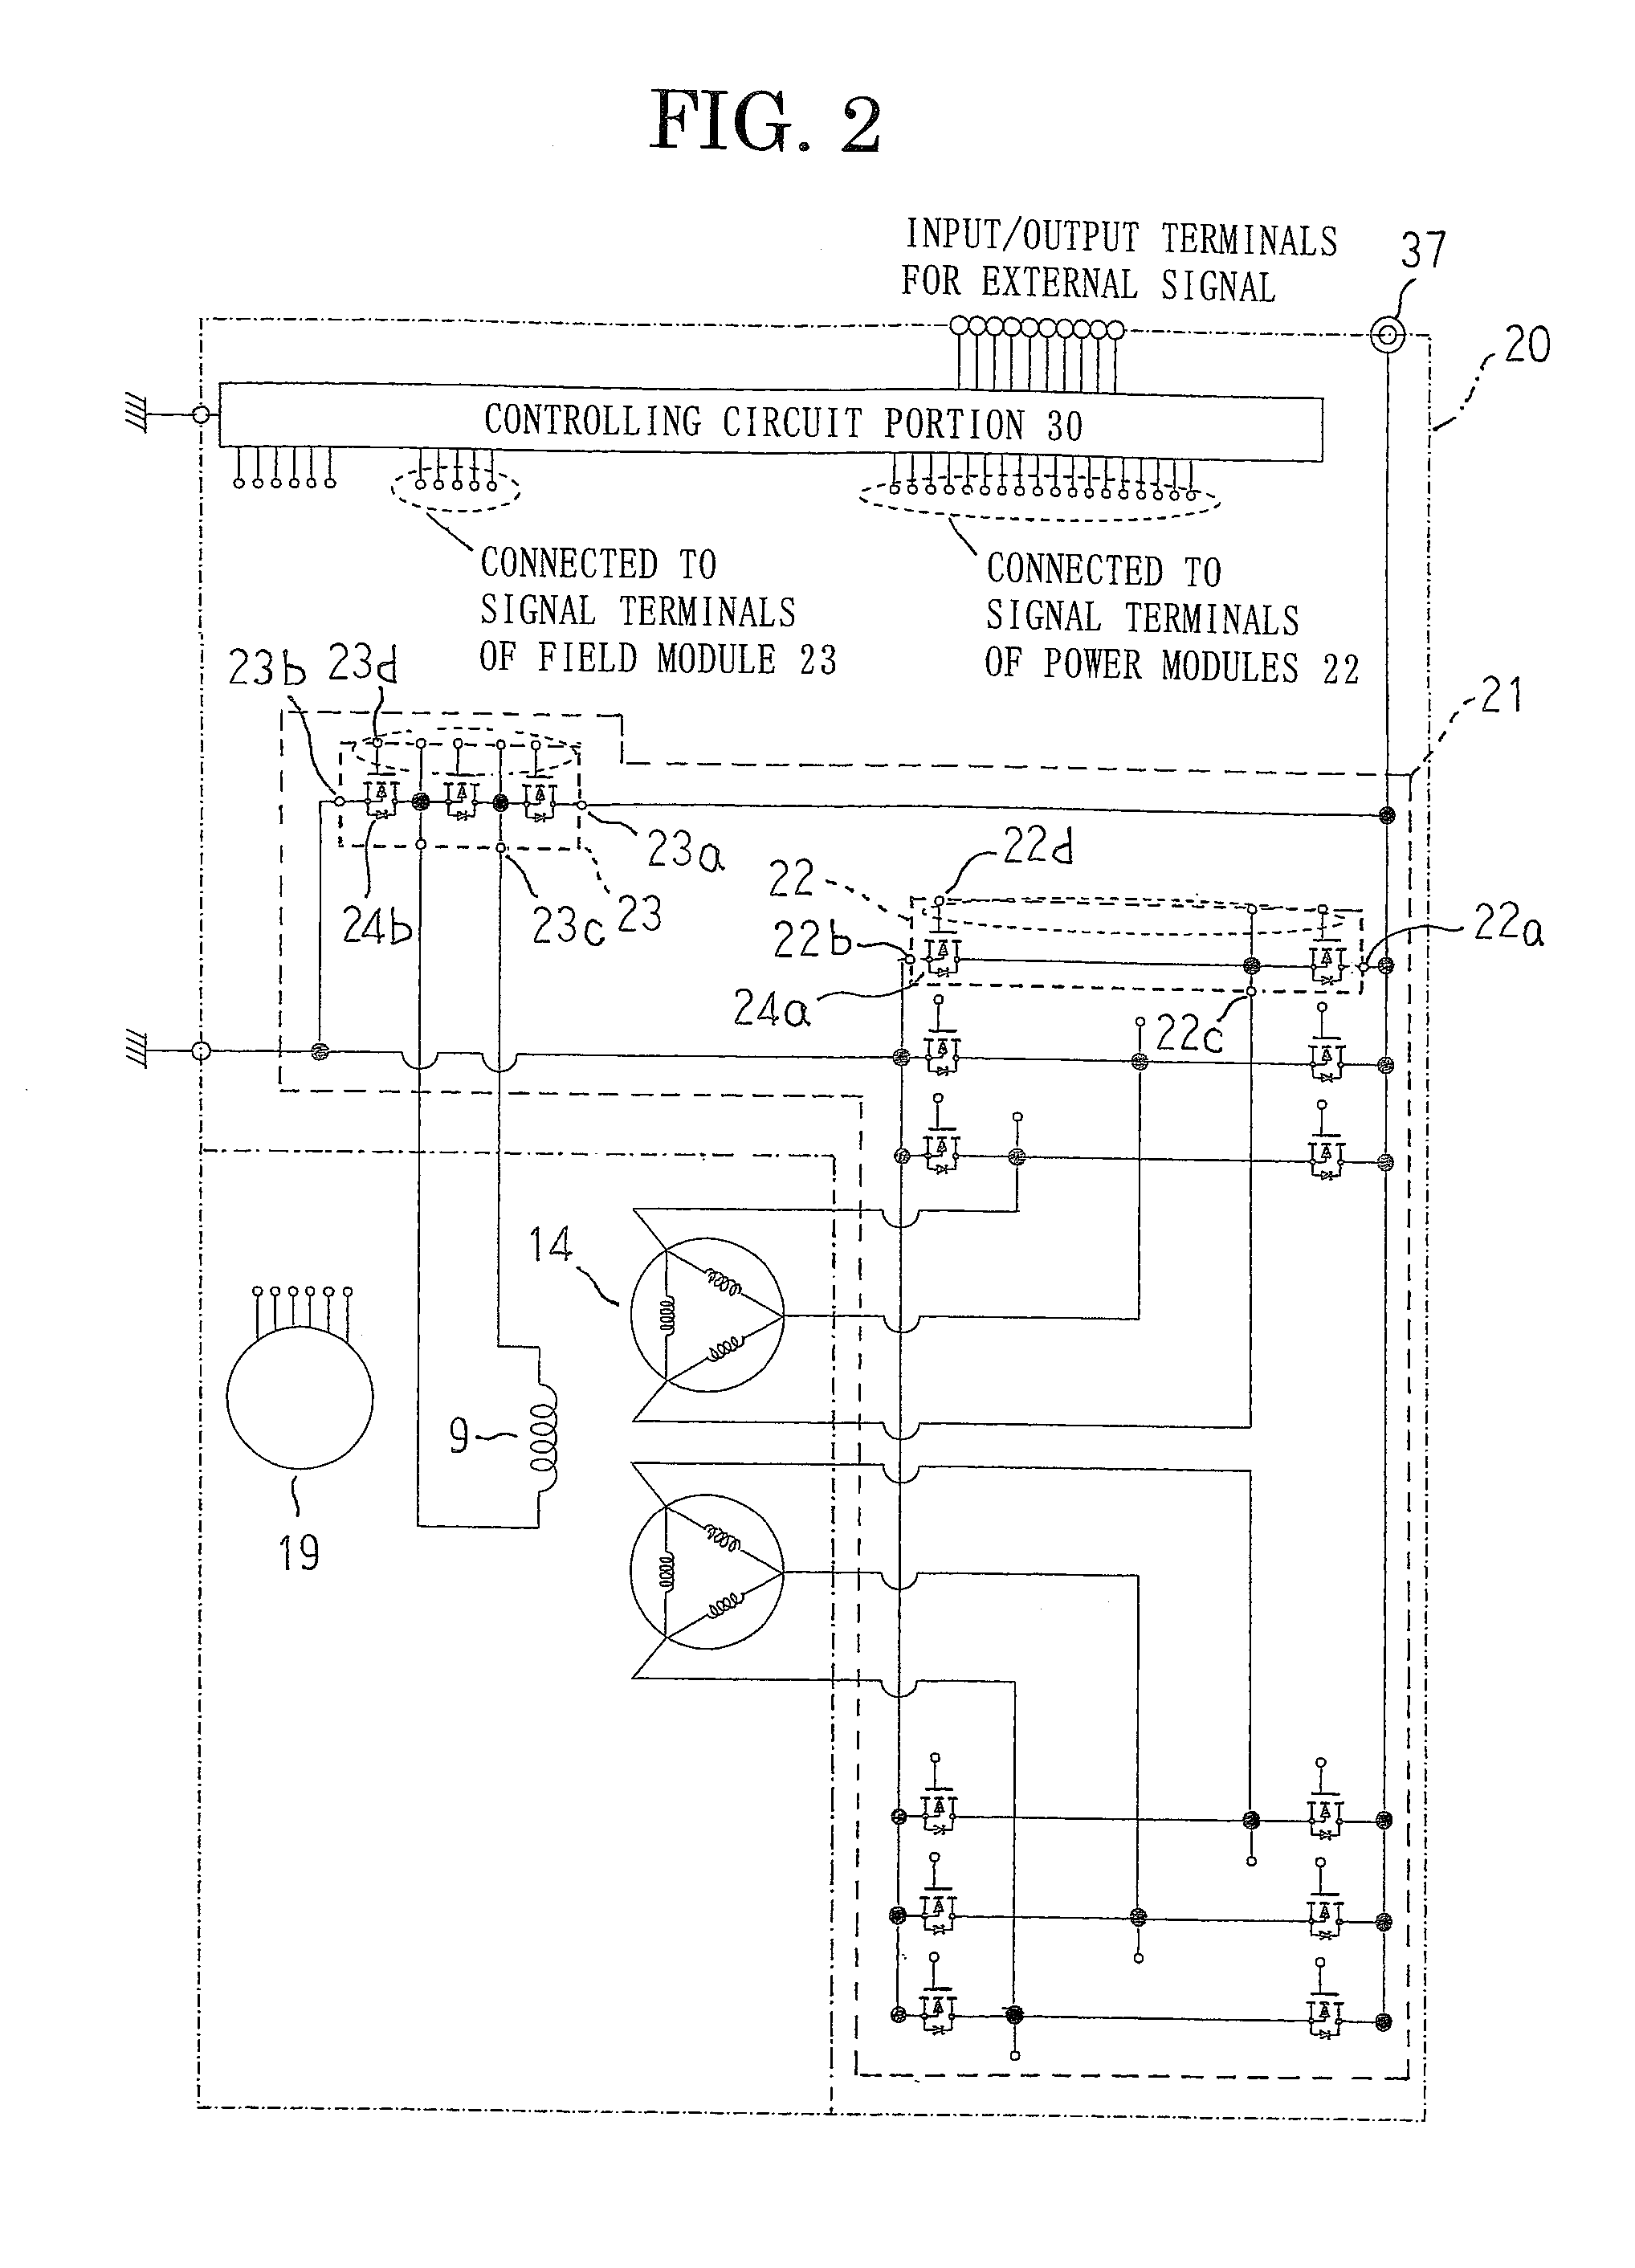 Automotive controlling apparatus-integrated dynamoelectric machine